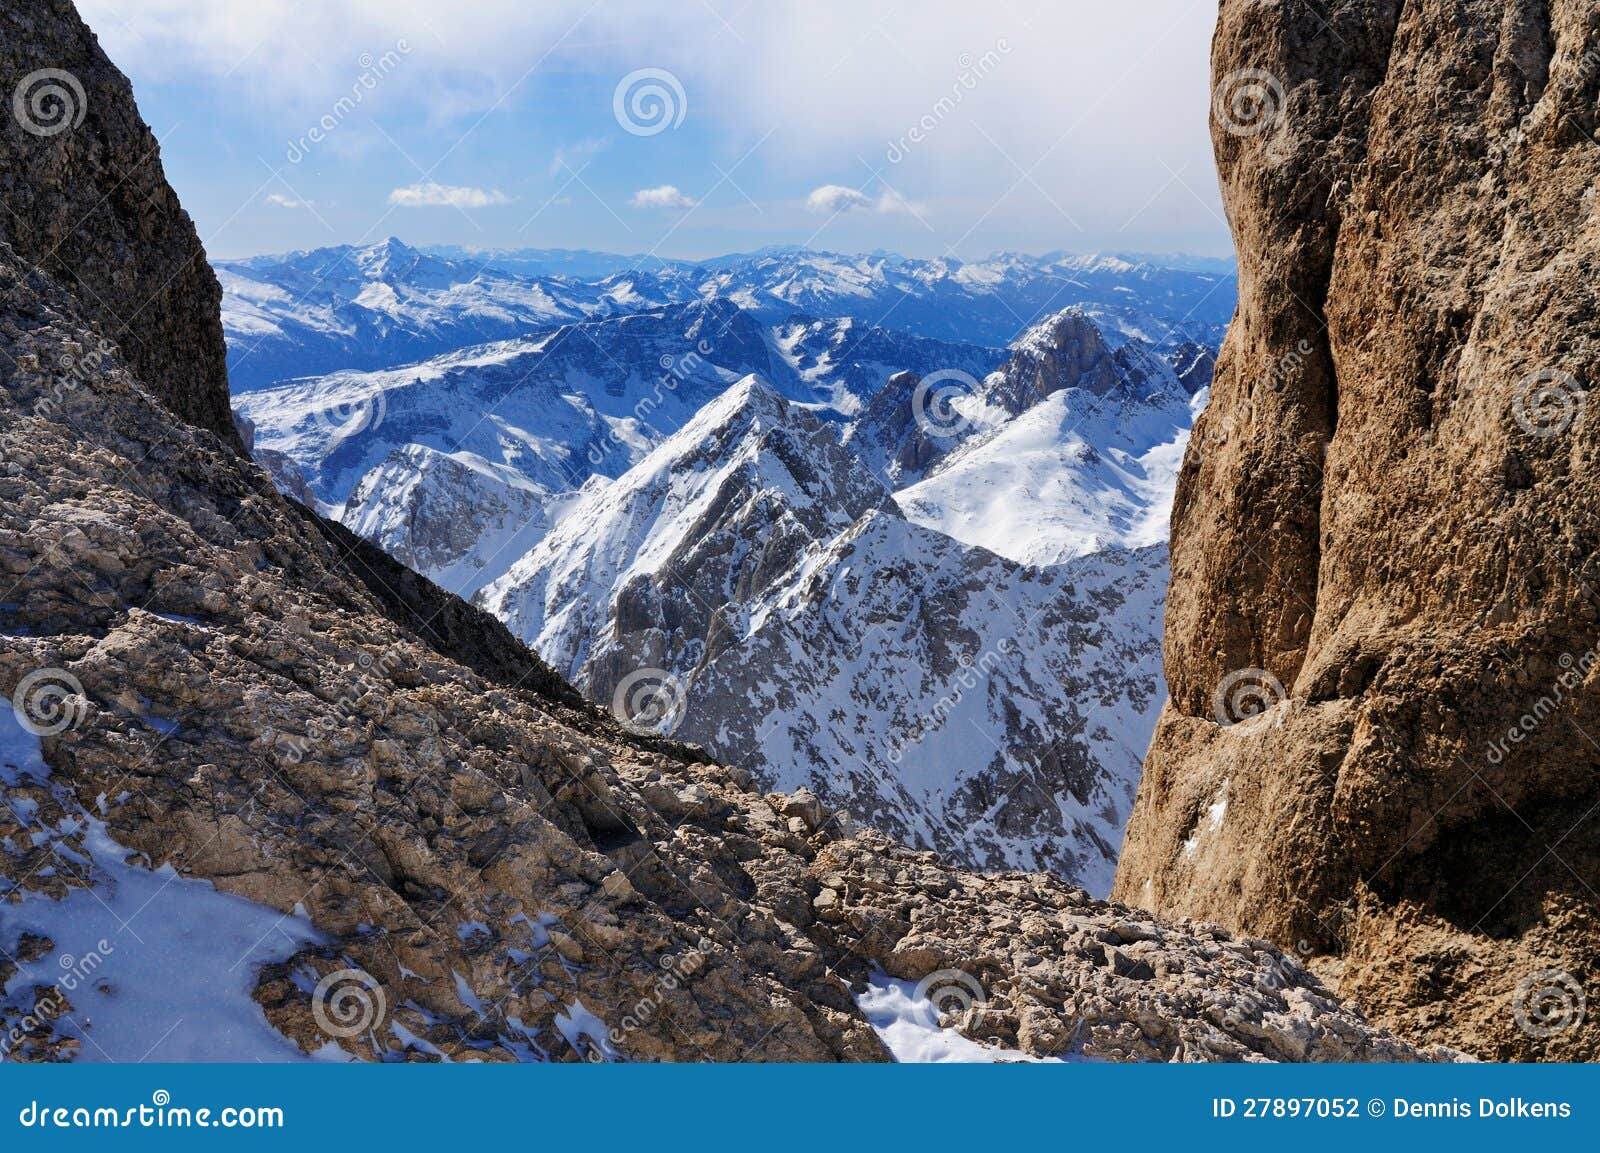 view from the marmolada, a mountain in italy